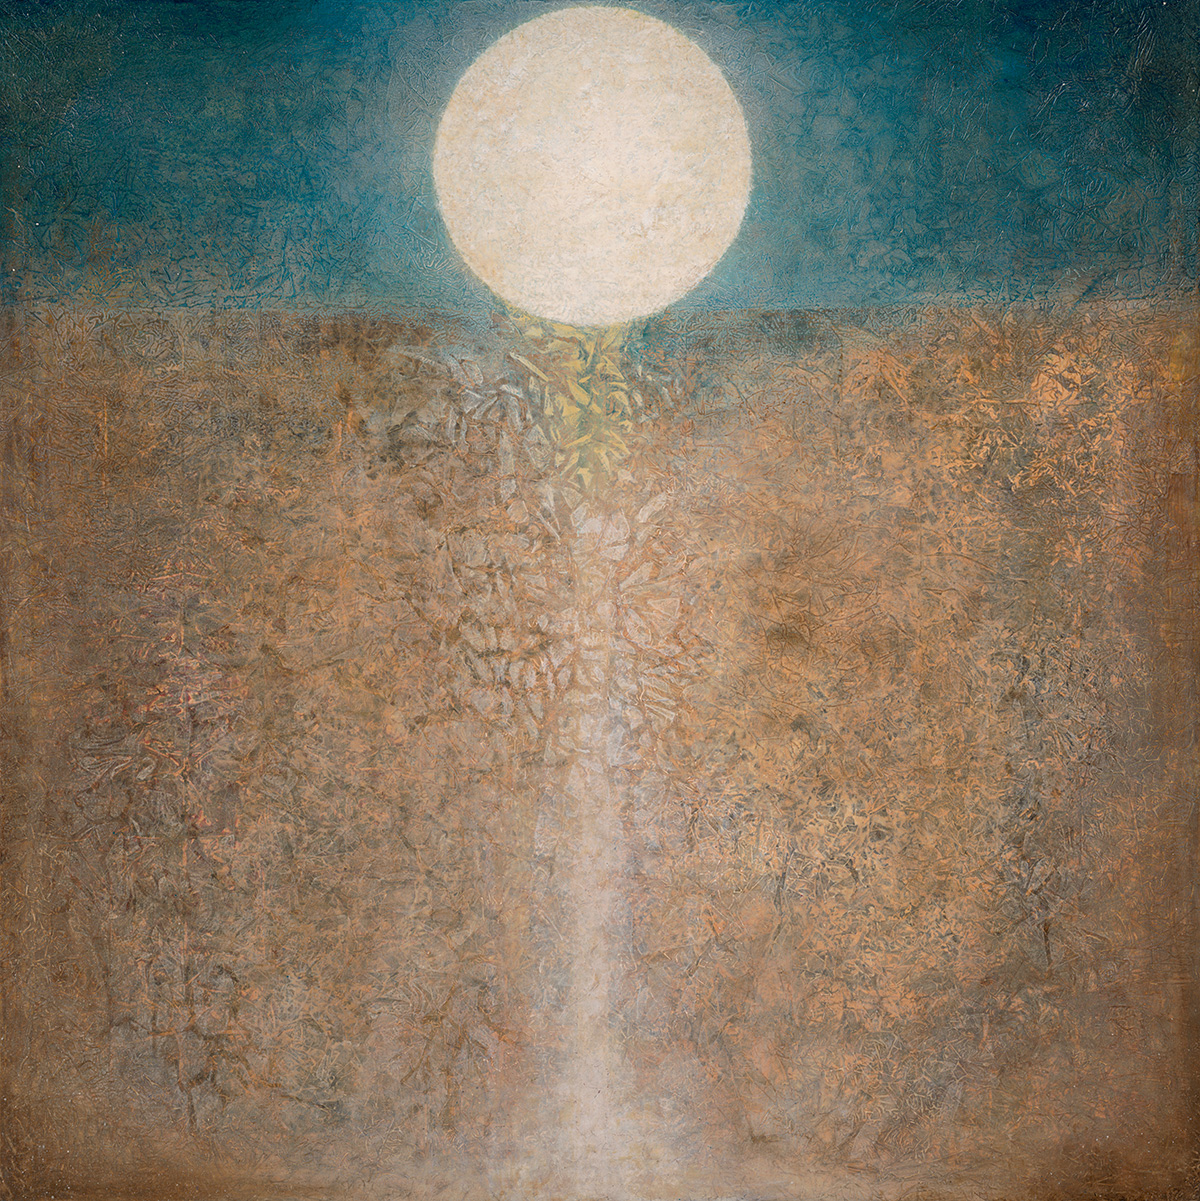 Passing Through   48” x 48” rice paper, minerals, oil on canvas